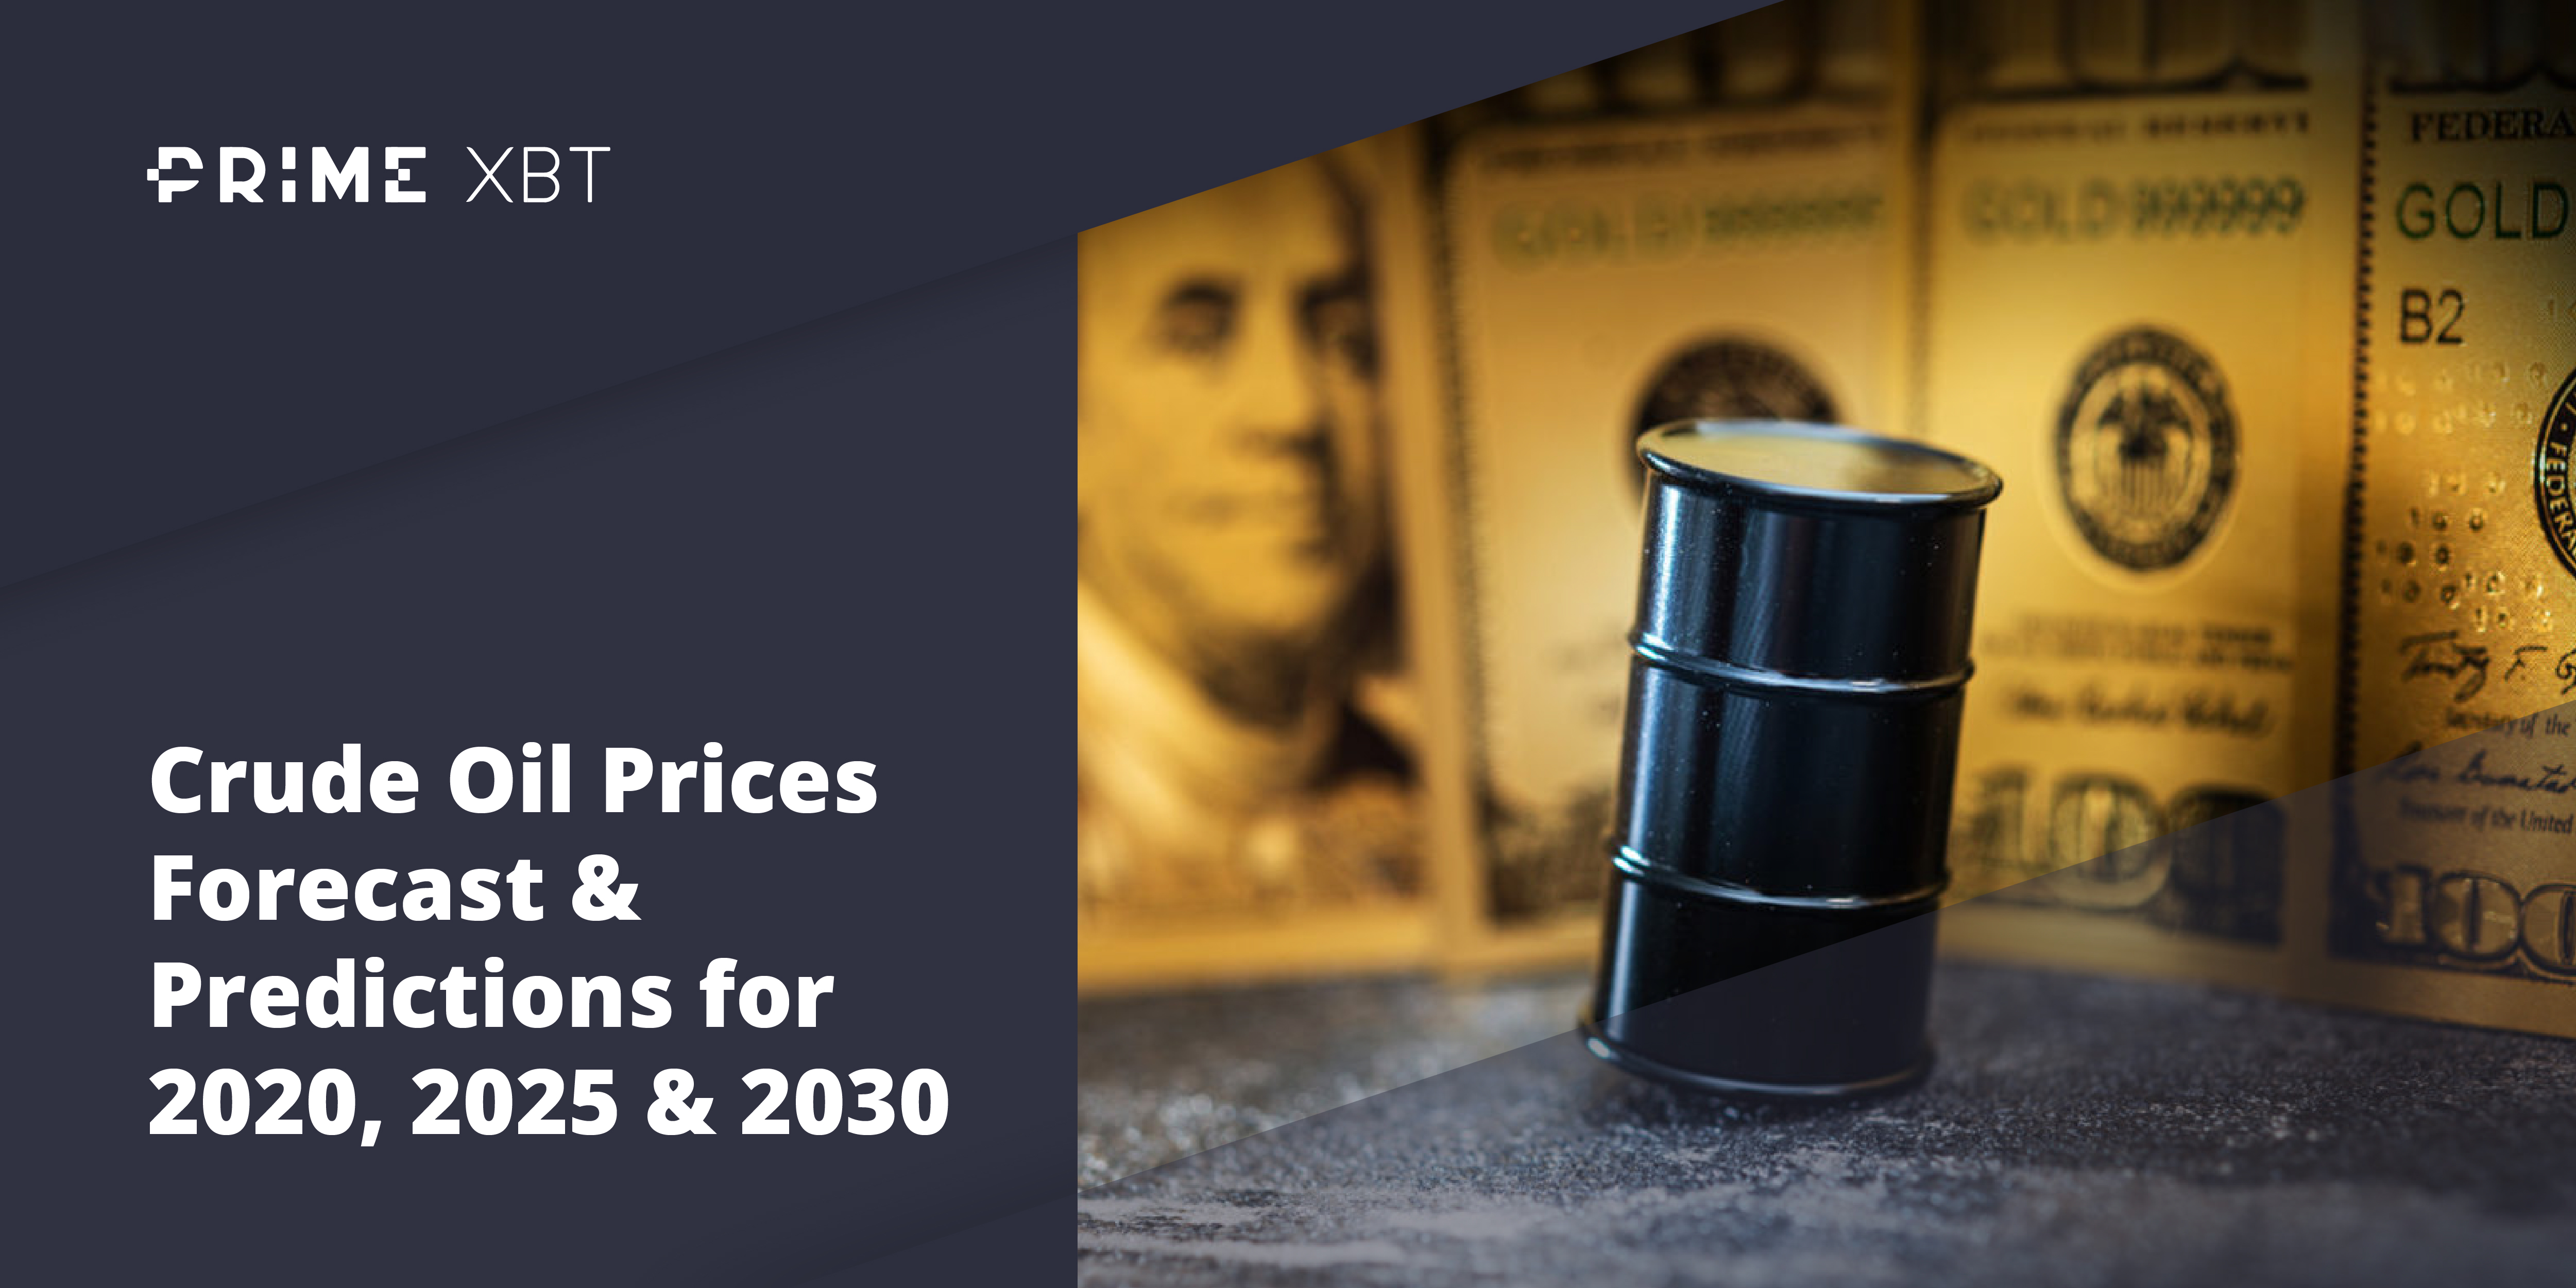 Crude Oil Prices Forecast & Predictions for 2023, 2025 & 2030 - oil1